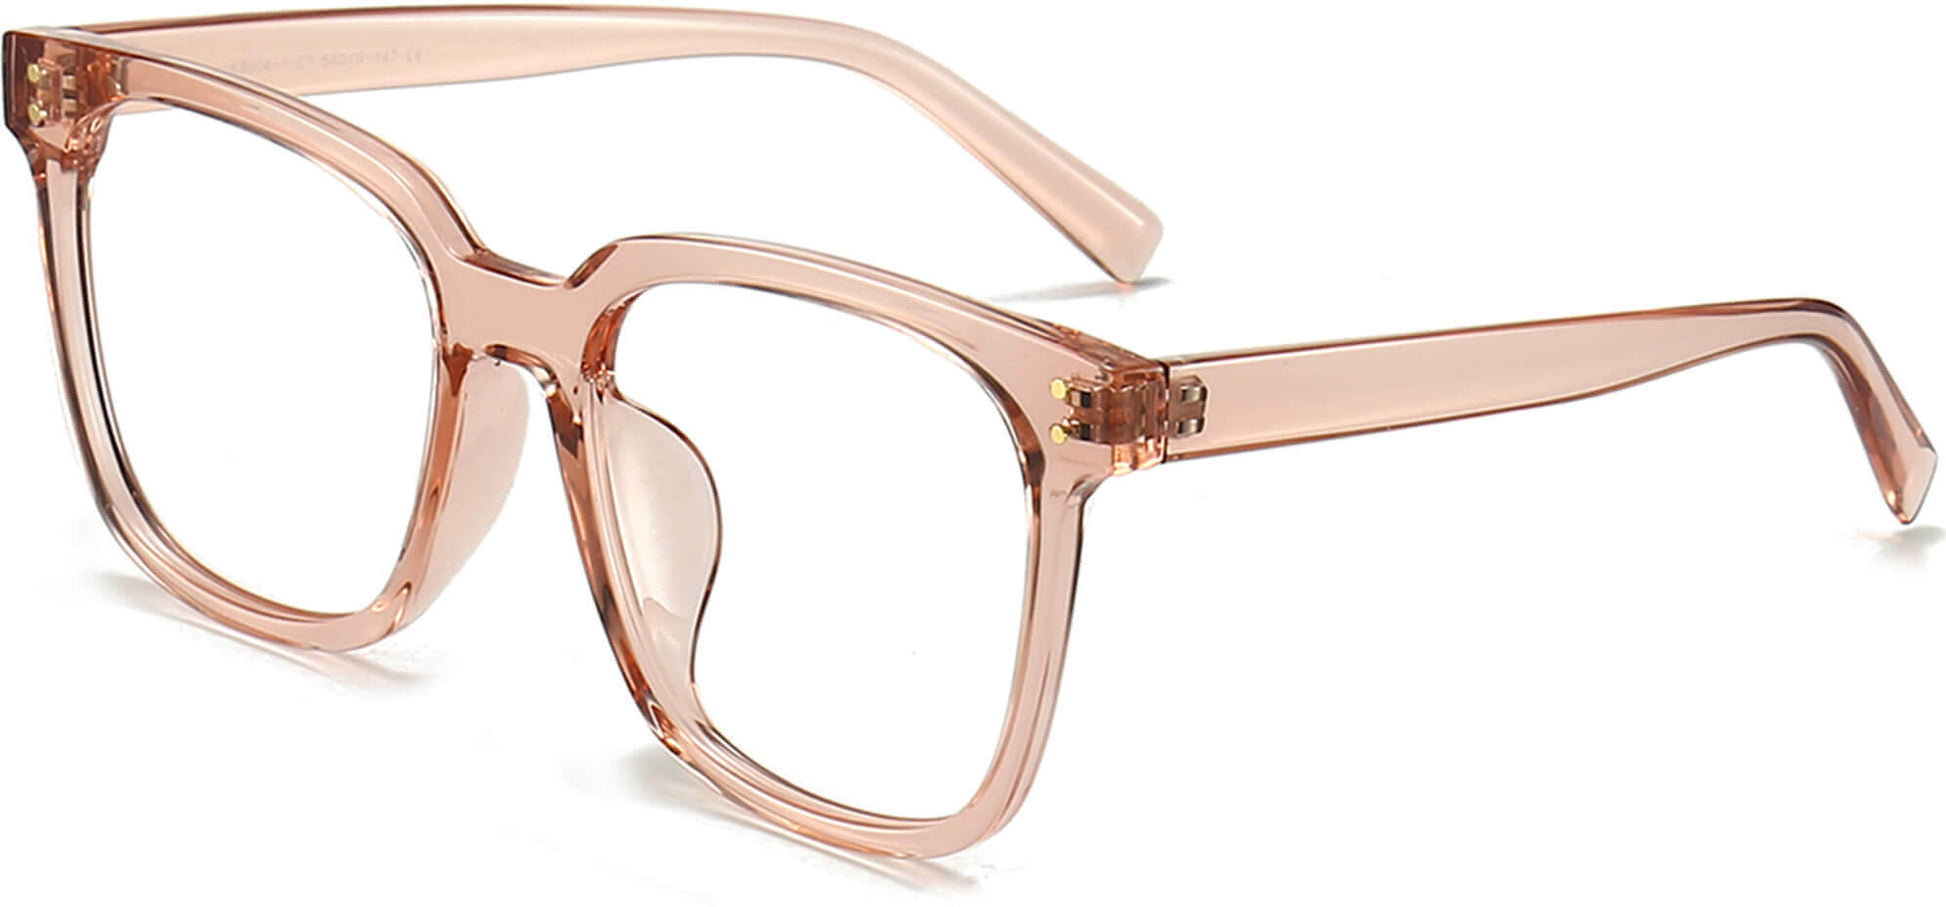 April Square Pink Eyeglasses from ANRRI, angle view